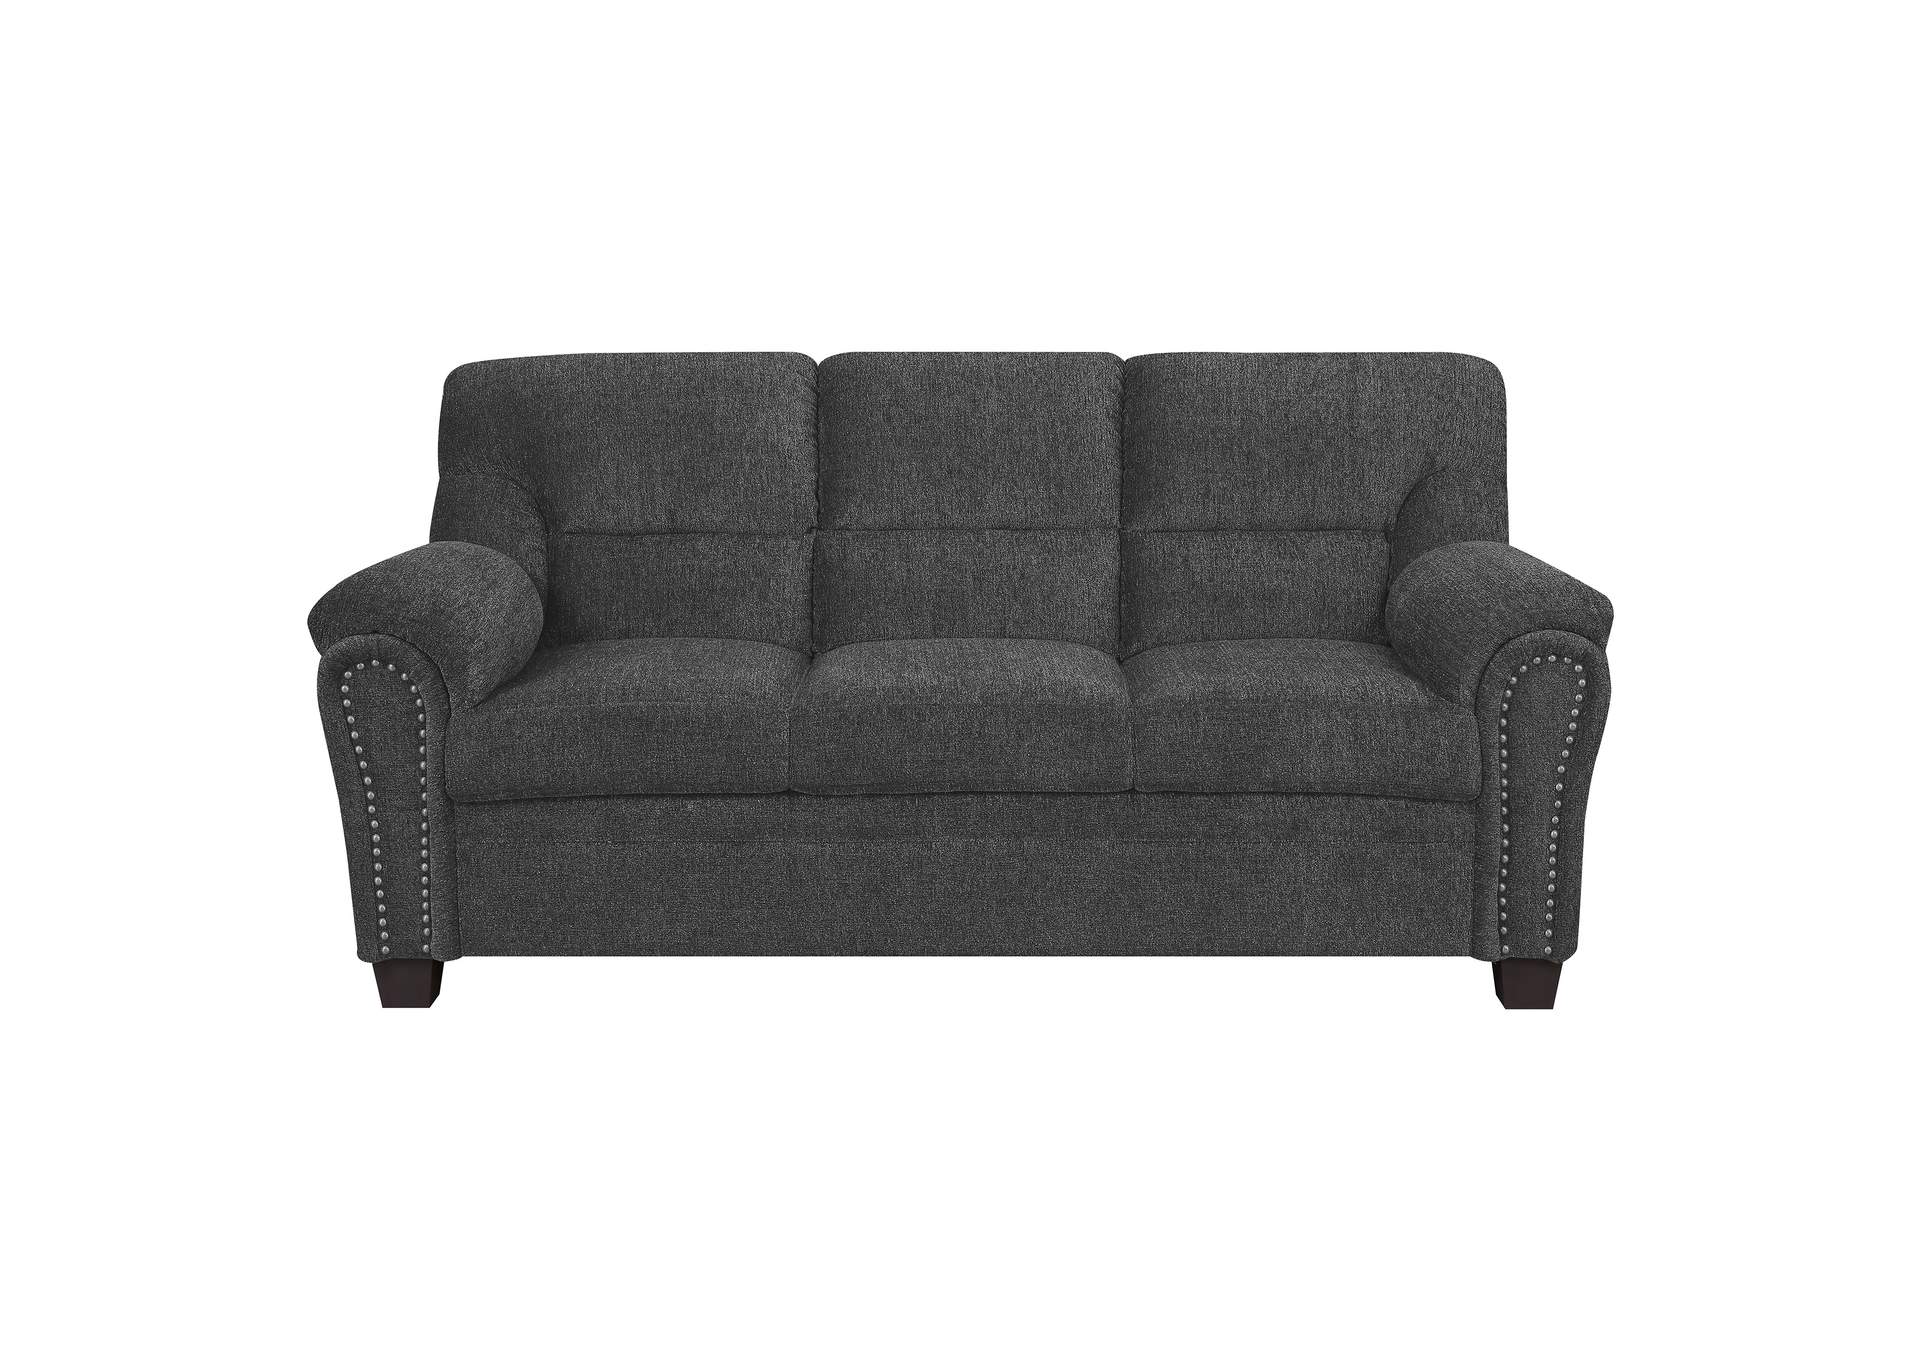 Clementine Upholstered Sofa with Nailhead Trim Grey,Coaster Furniture